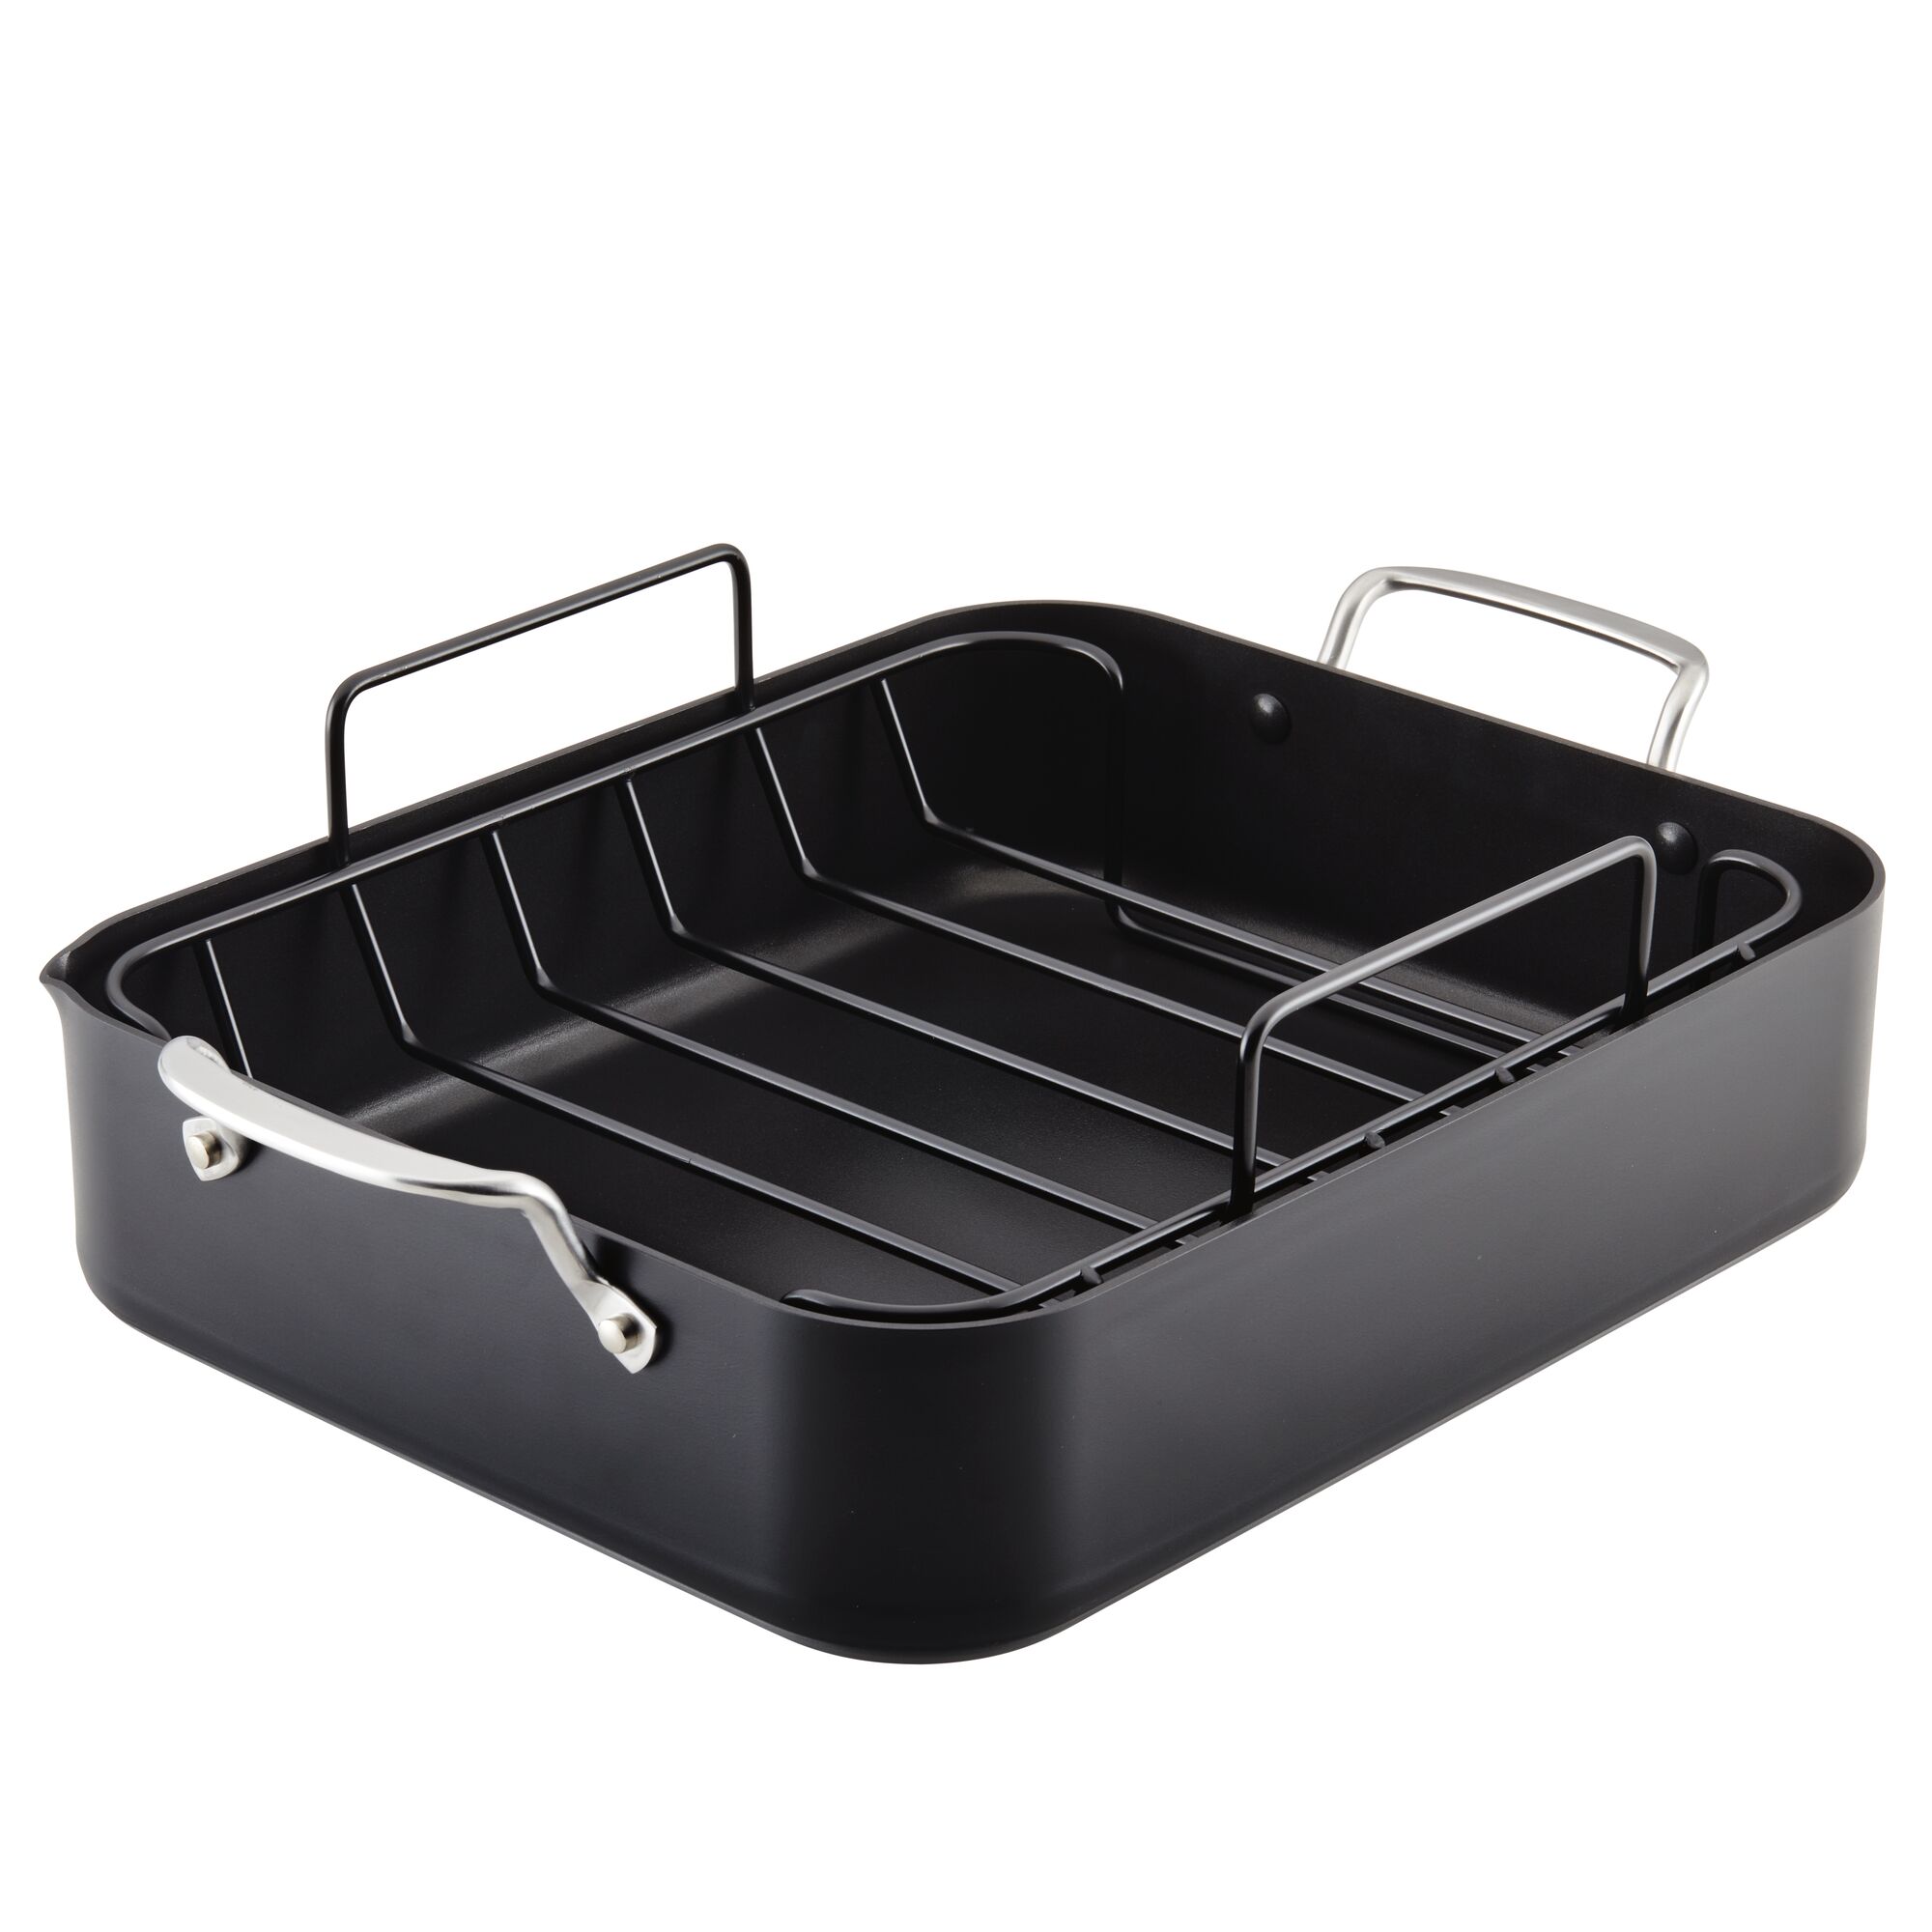 Kitchenaid Roaster with Removable Nonstick Rack